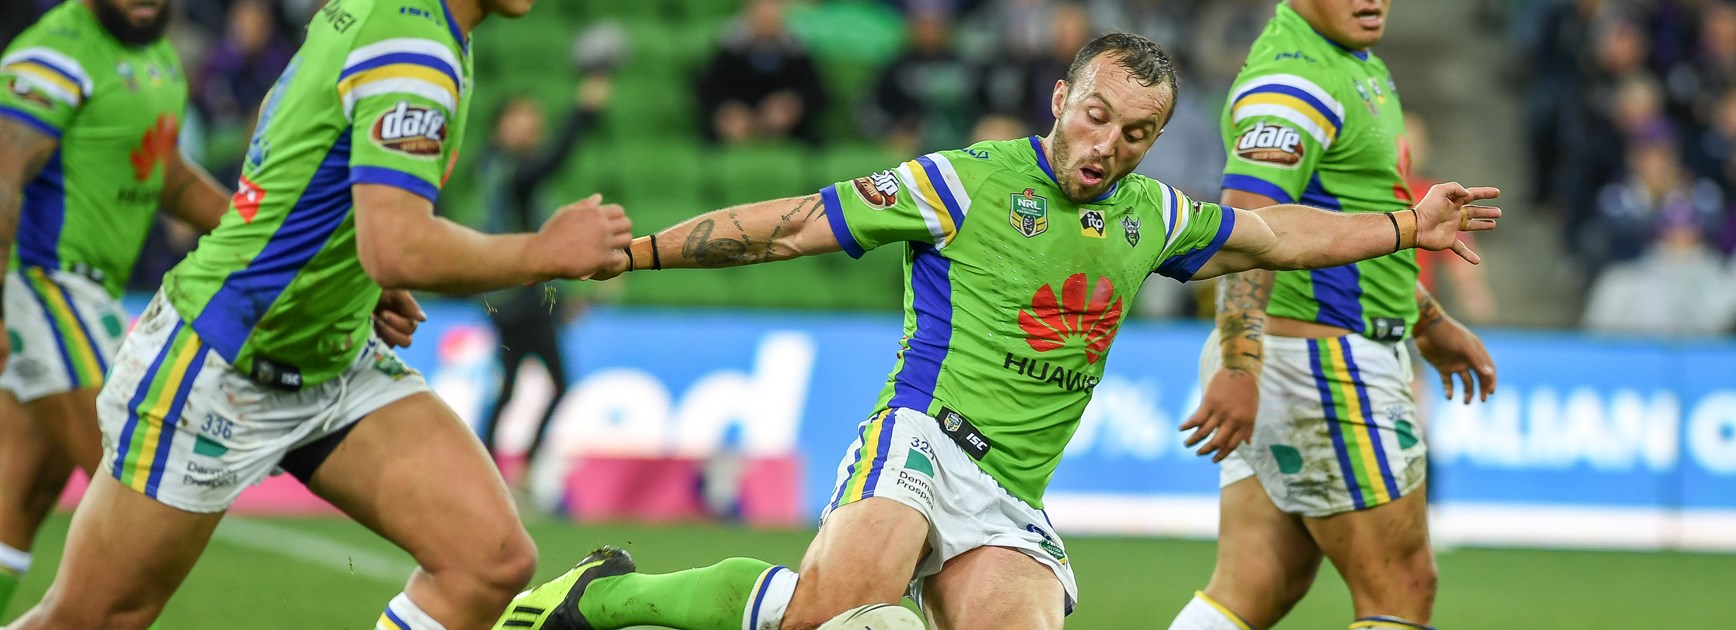 By the numbers: Raiders v Storm